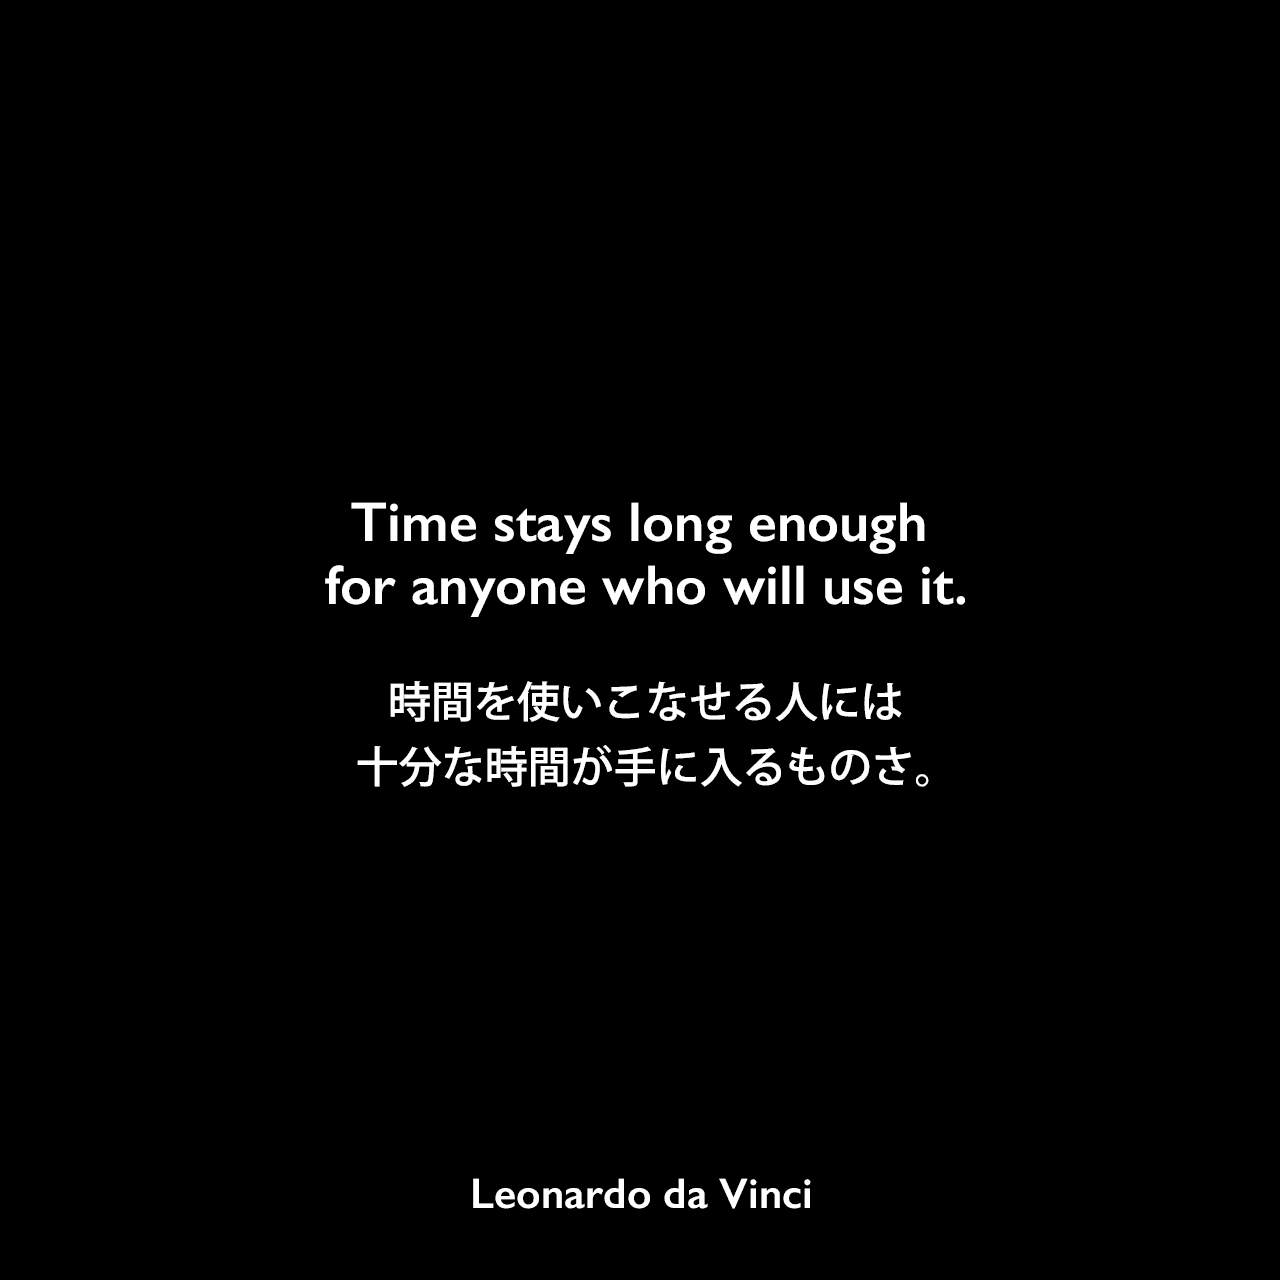 Time stays long enough for anyone who will use it.時間を使いこなせる人には、十分な時間が手に入るものさ。